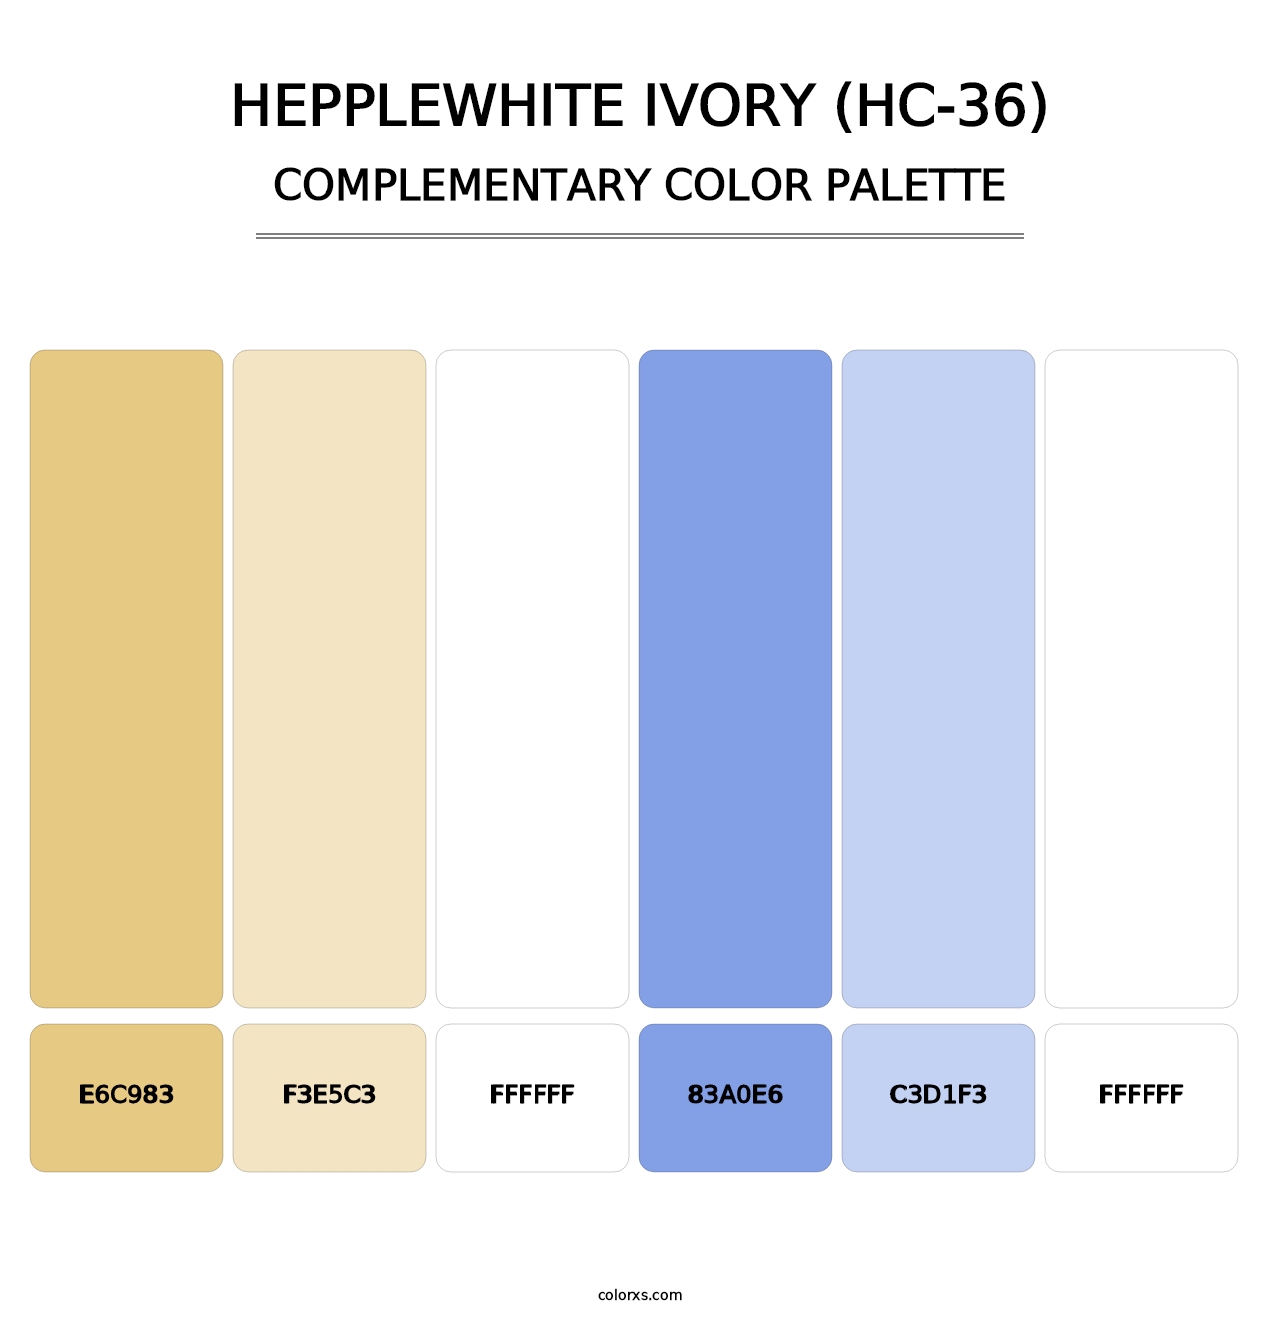 Hepplewhite Ivory (HC-36) - Complementary Color Palette